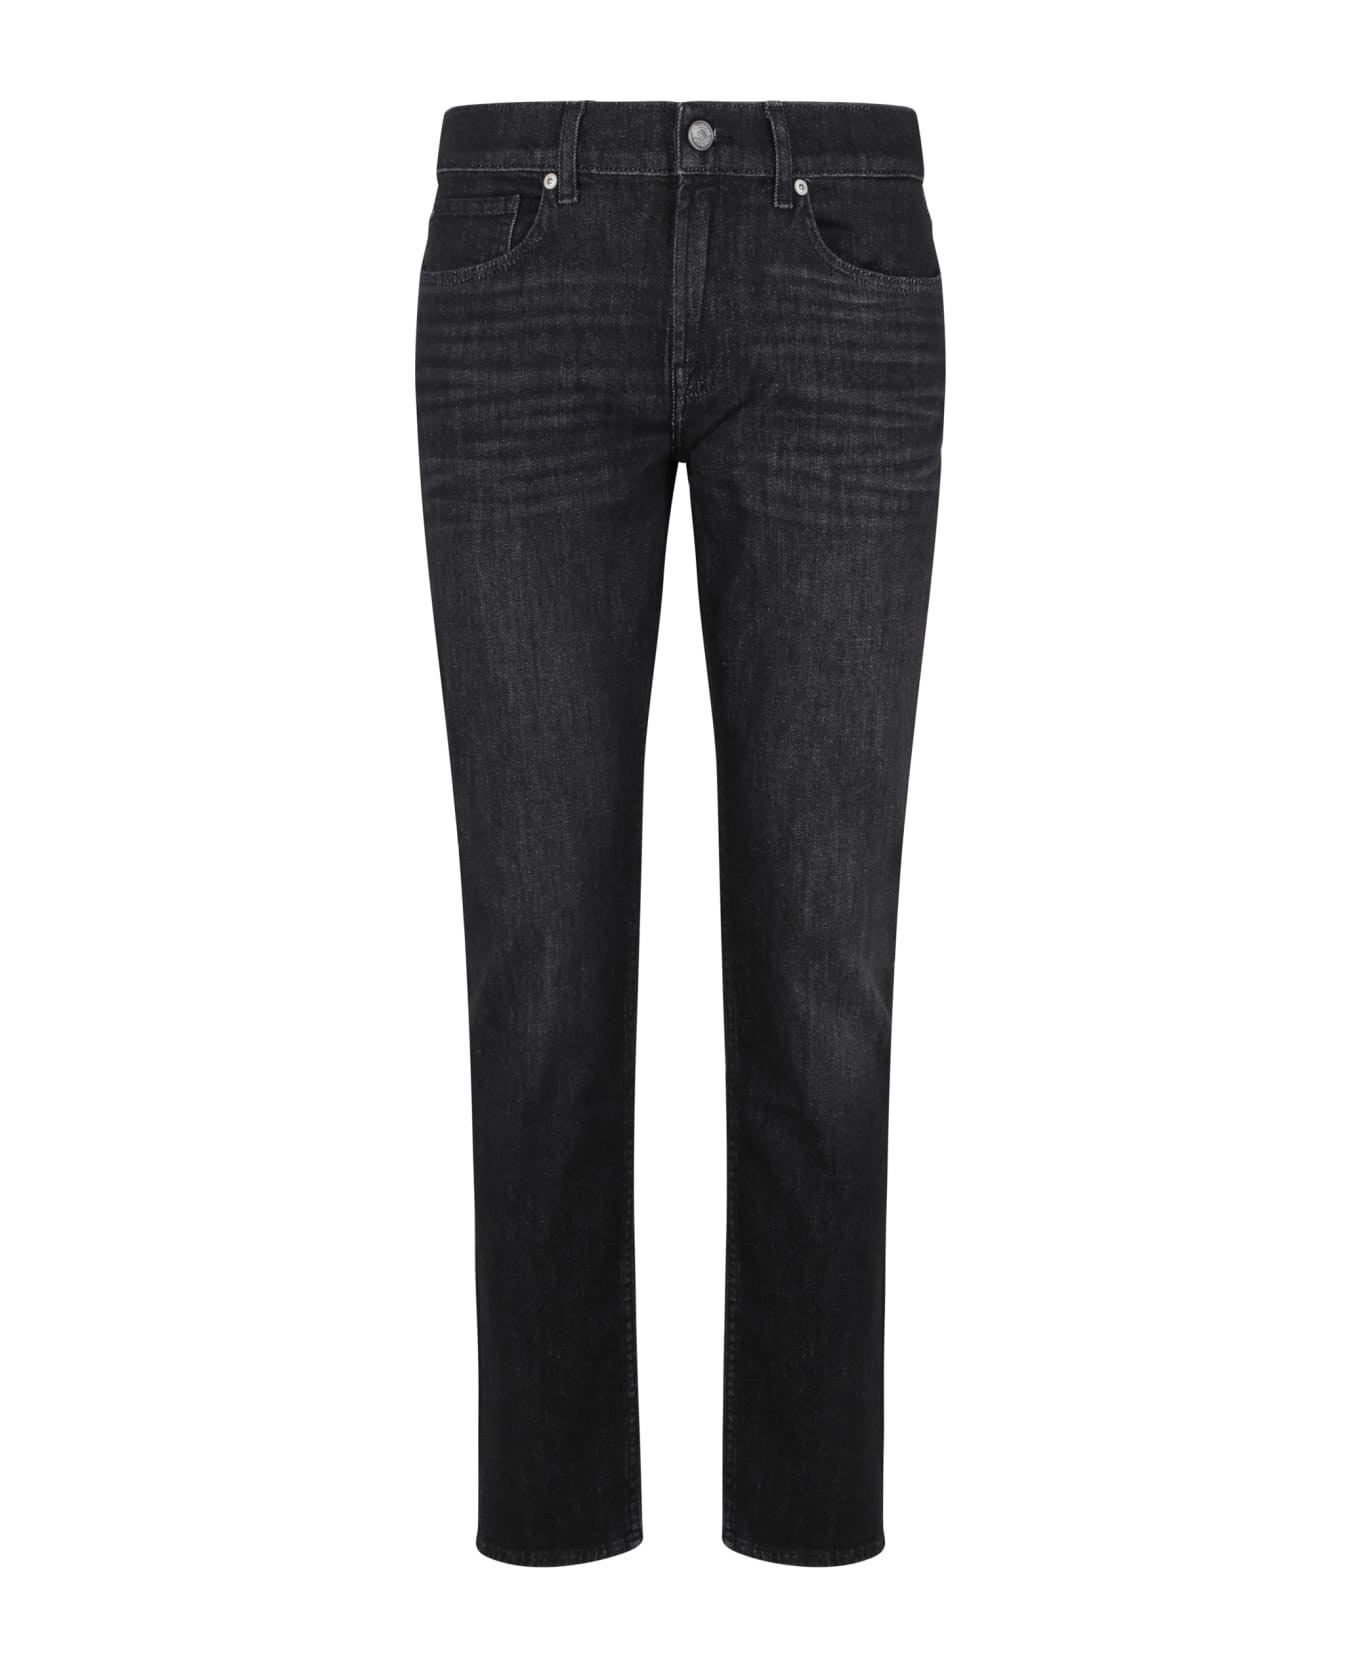 7 For All Mankind Slimmy Jeans - Black